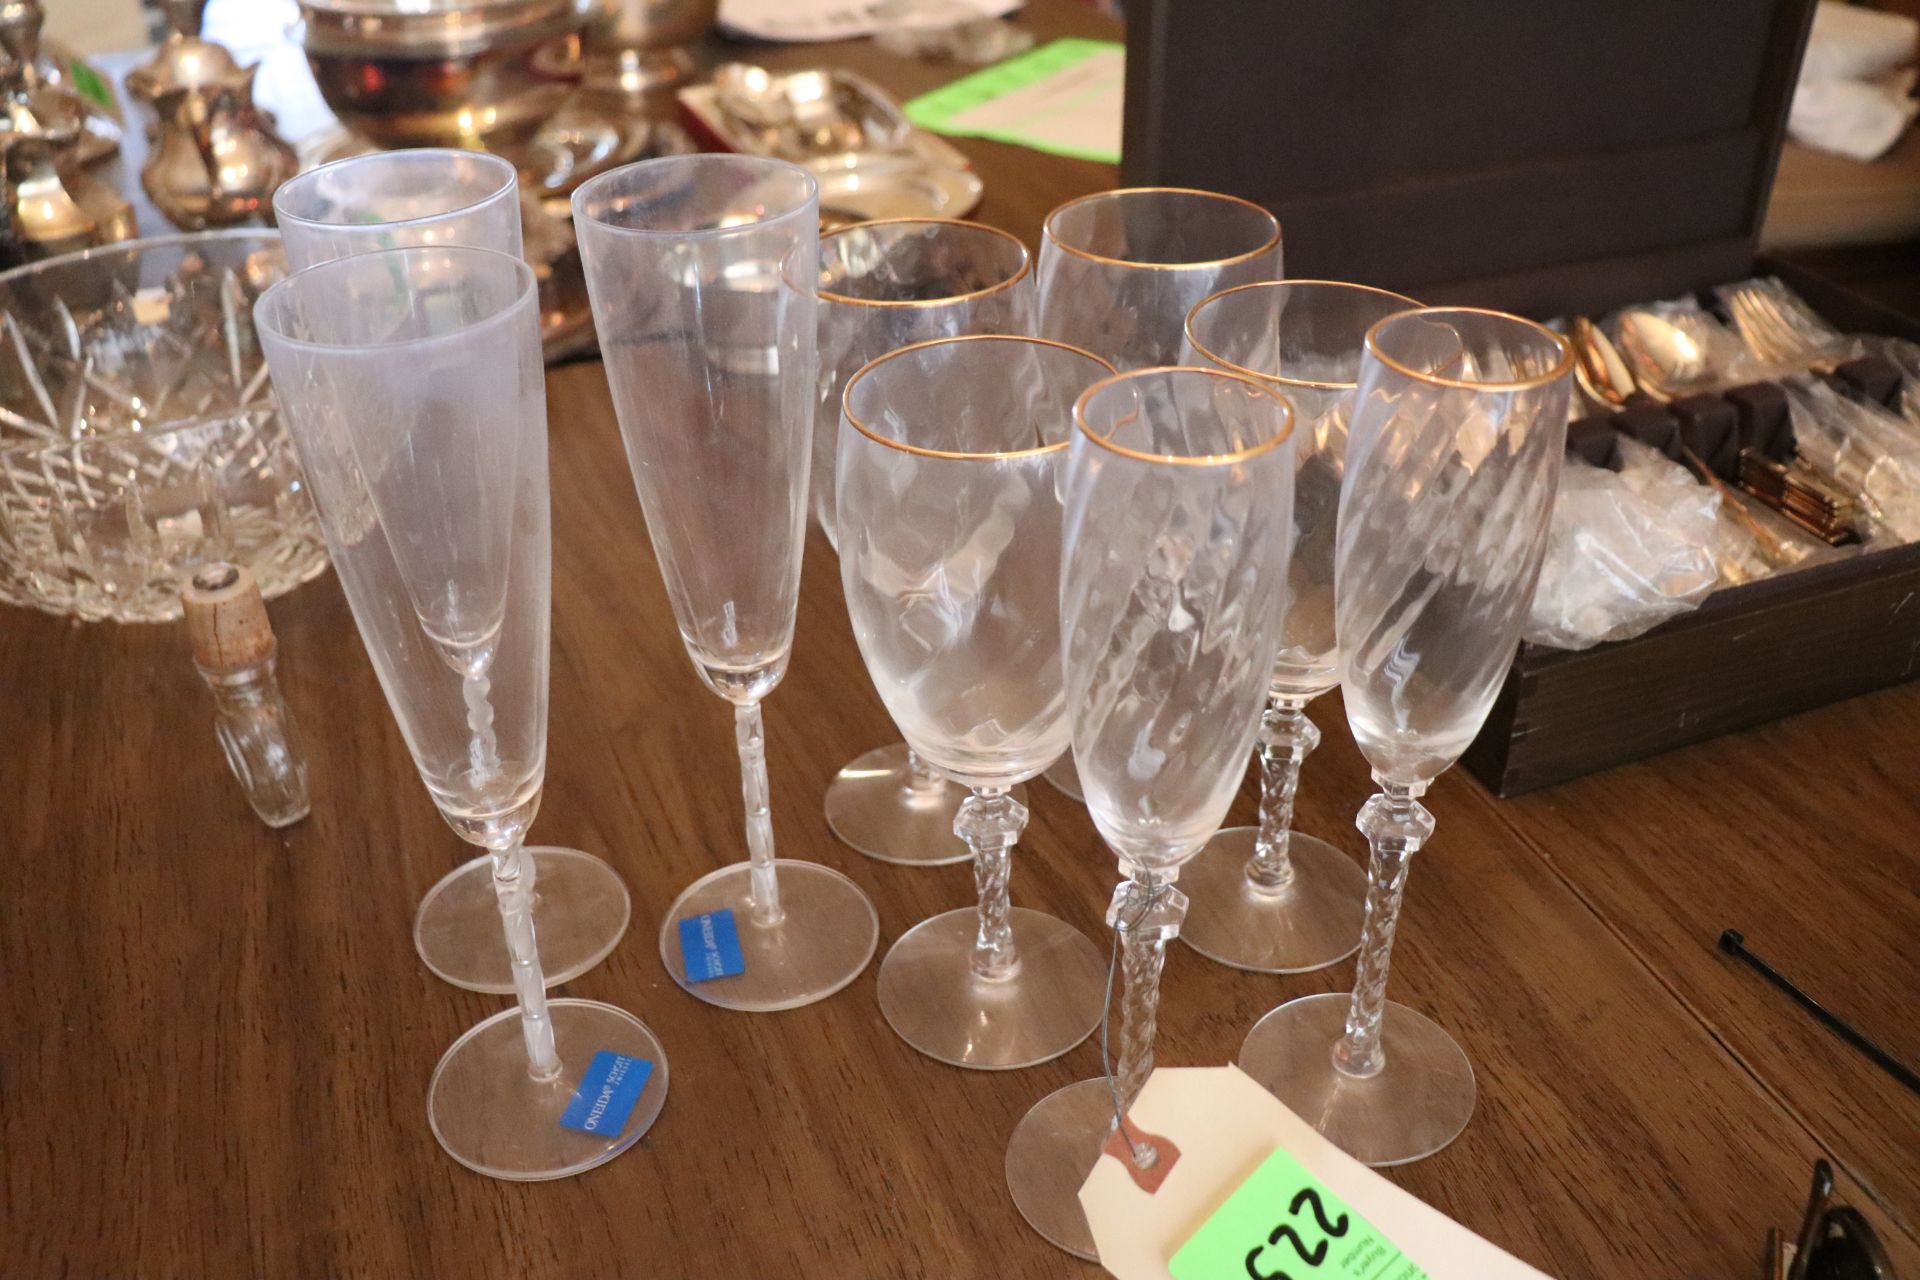 Group comprising 9 champagne and wine glasses, 6 by Lenox and 3 by Oneida